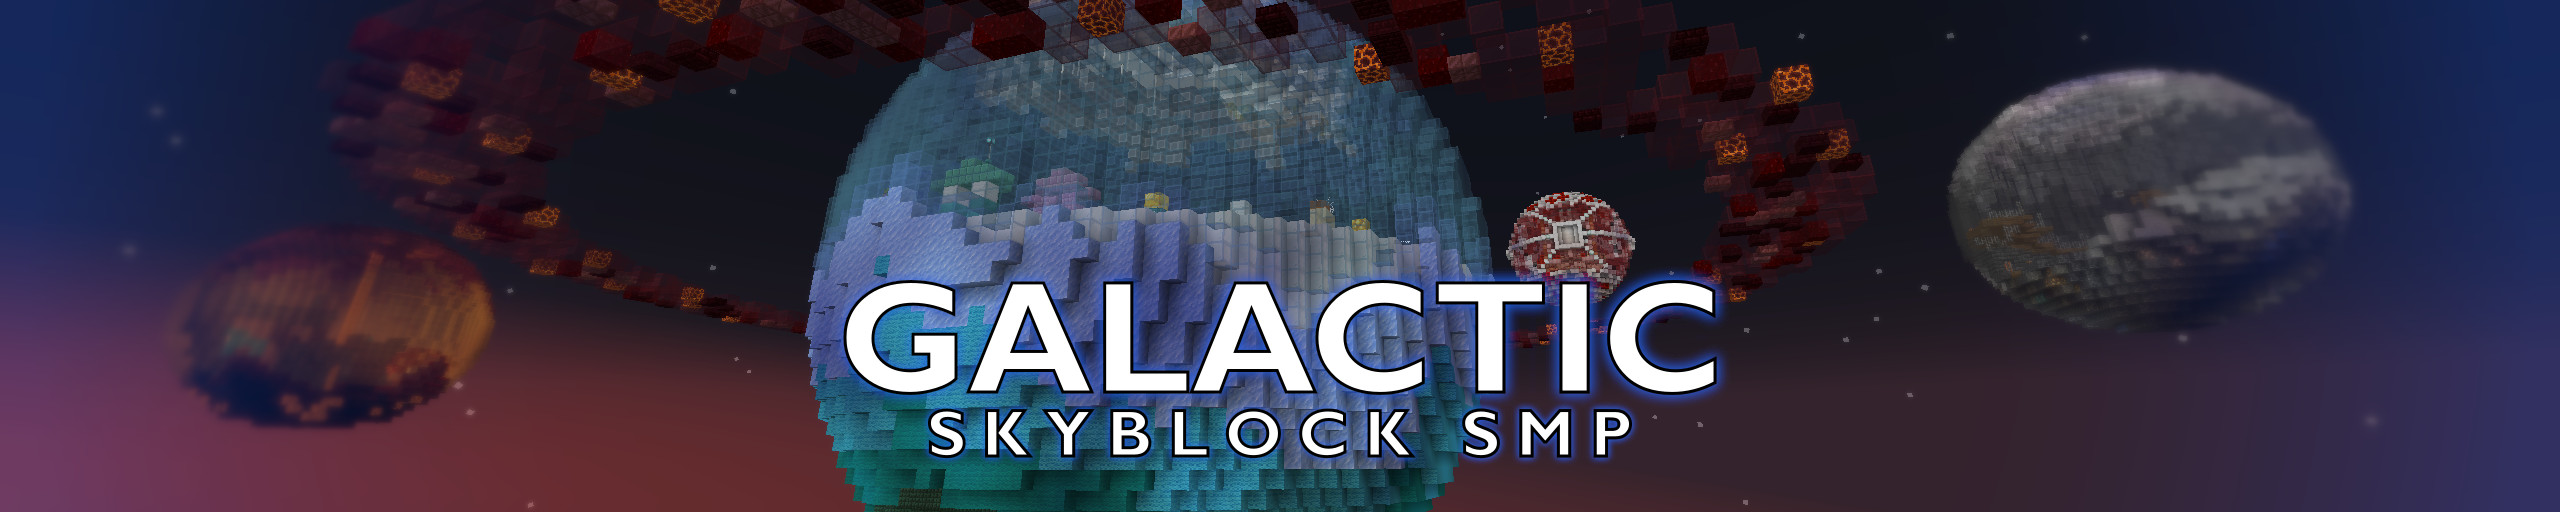 More info on Galactic Skyblock